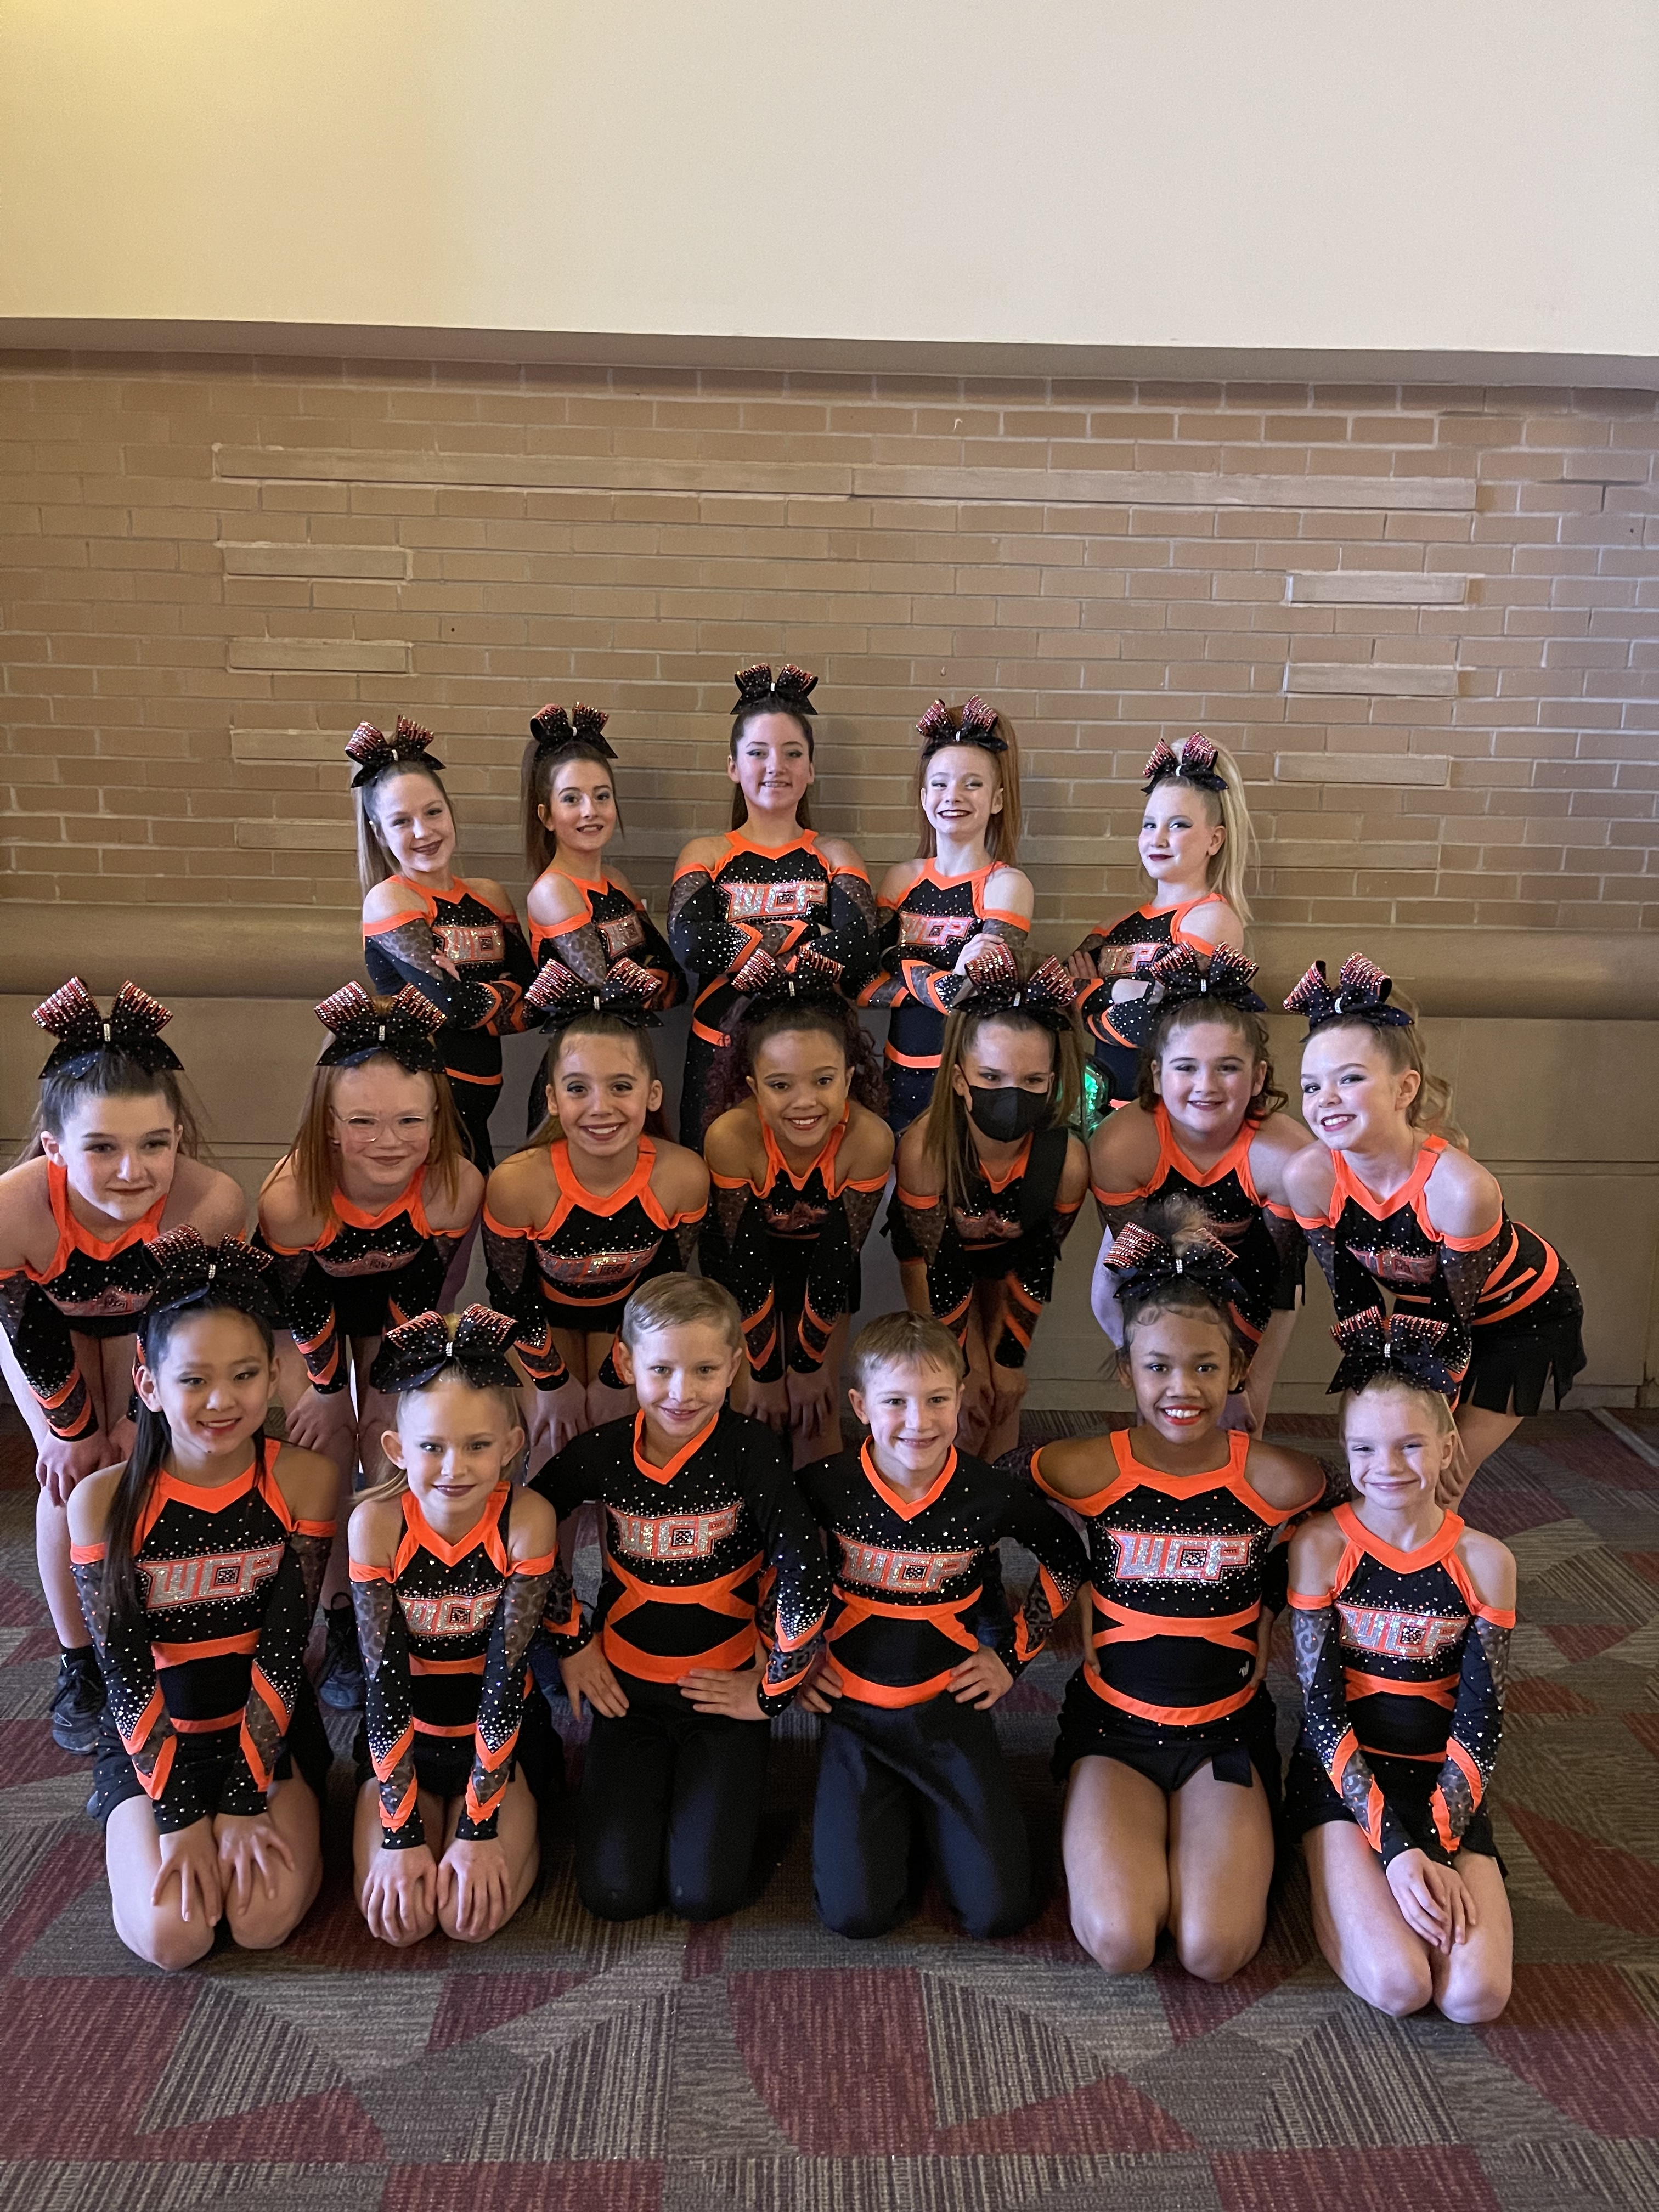 Youth cheer team